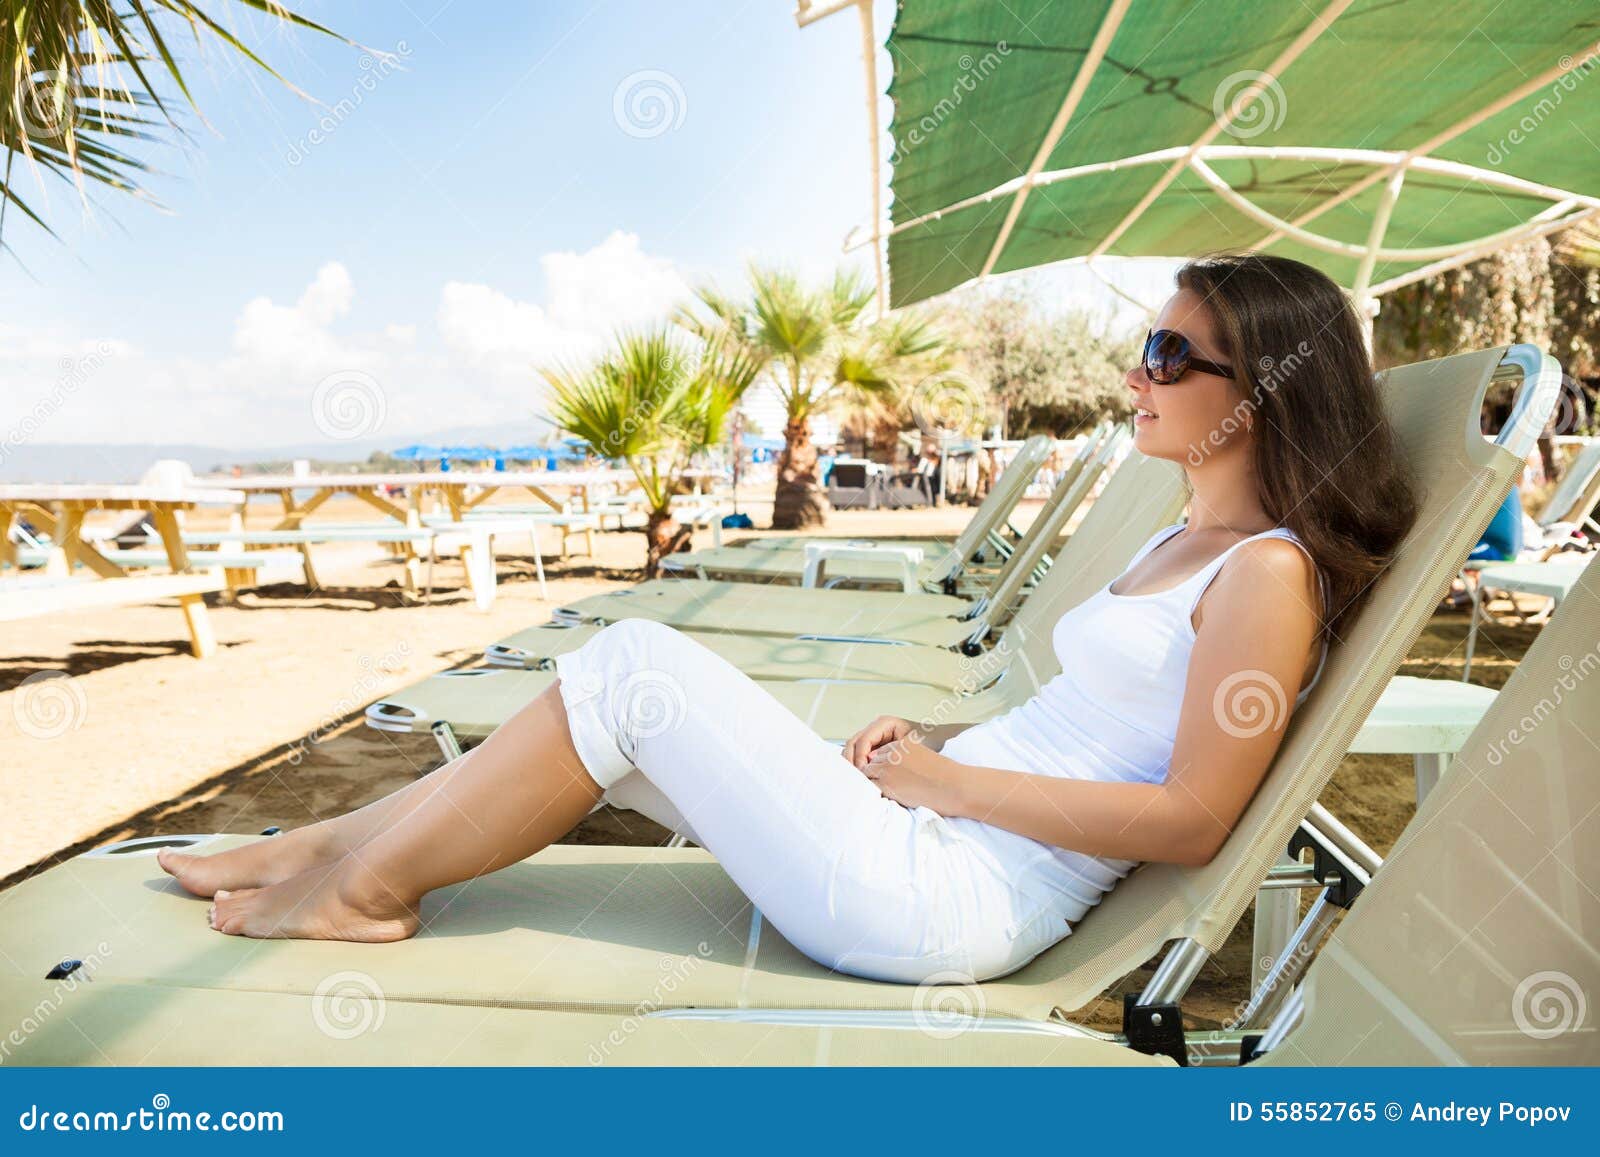 Woman Relaxing On Lounge Chair At Beach Stock Image Image Of Full